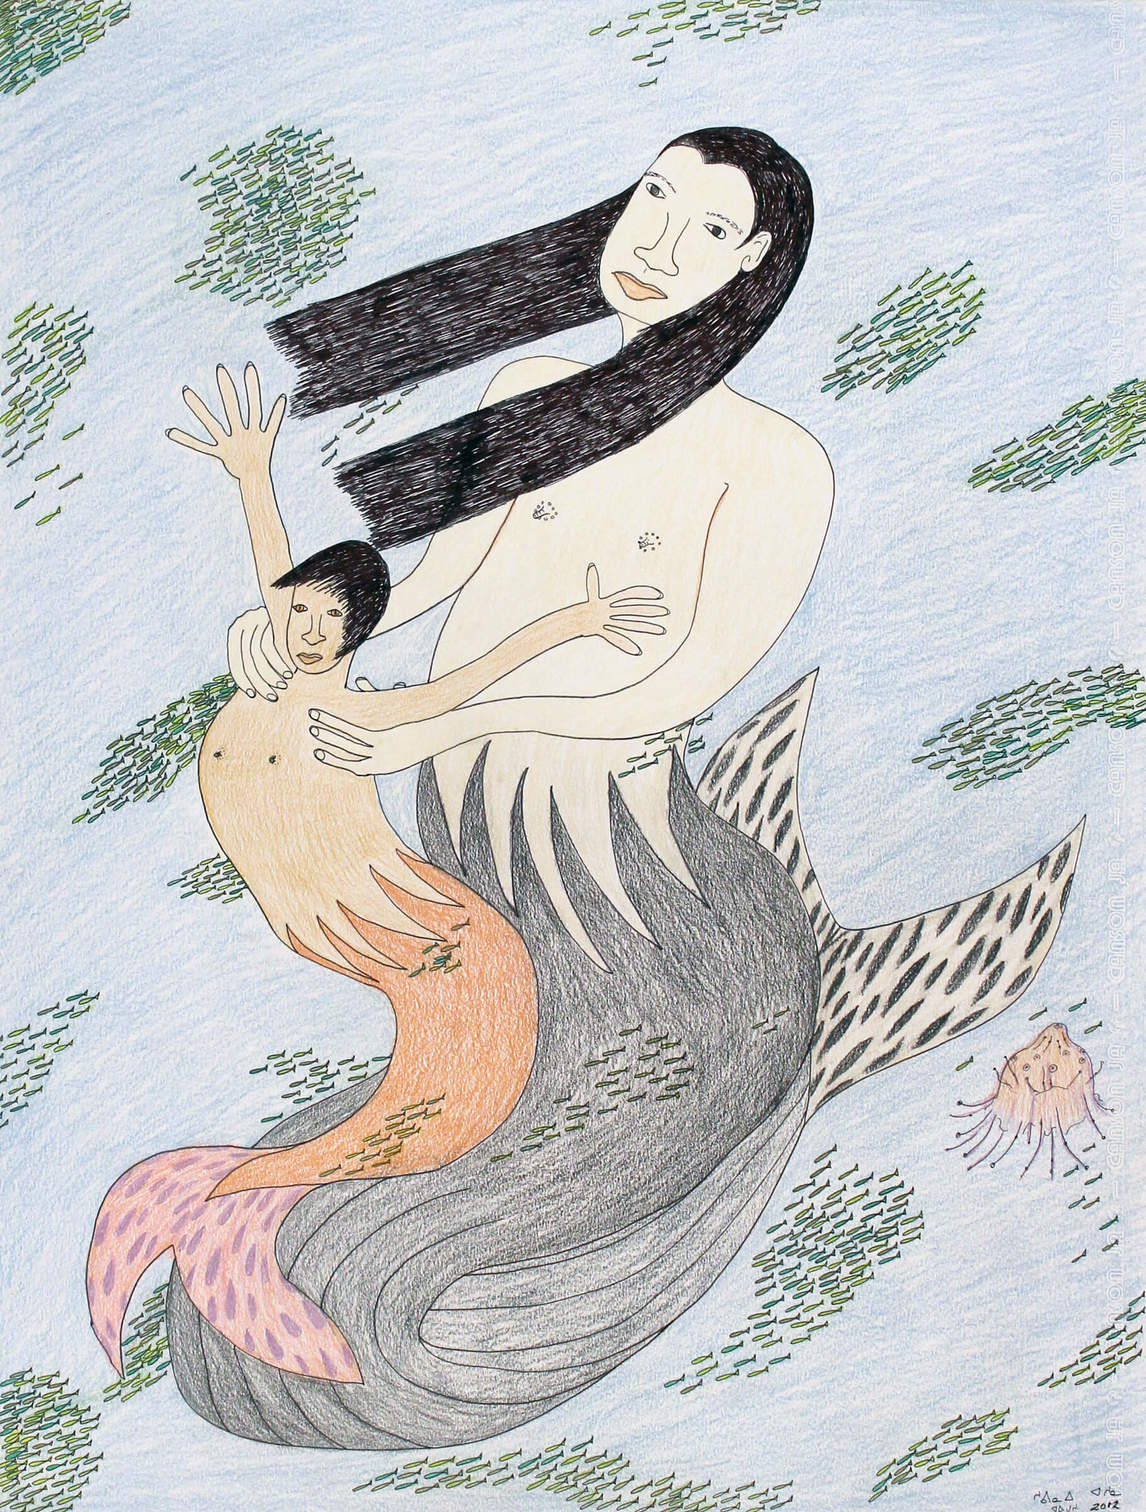 Art Canada Institute, Shuvinai Ashoona, Composition (Mother and Child Sedna), 2012